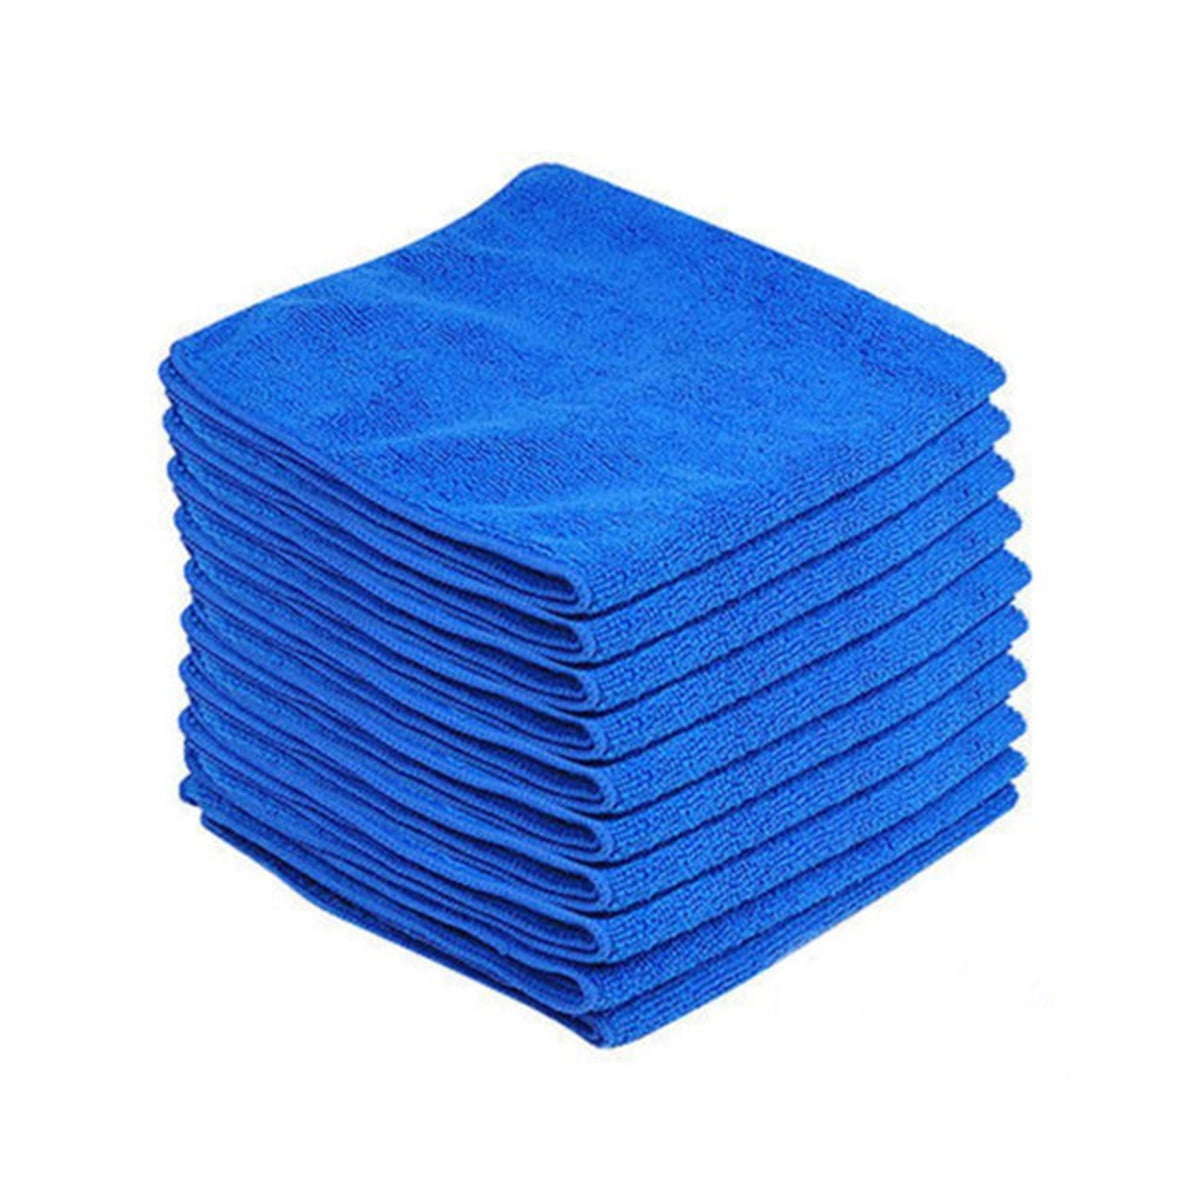 10pcs Pack Microfiber Cloths Towels For Mirrors Windows Surfaces Furniture Cars 